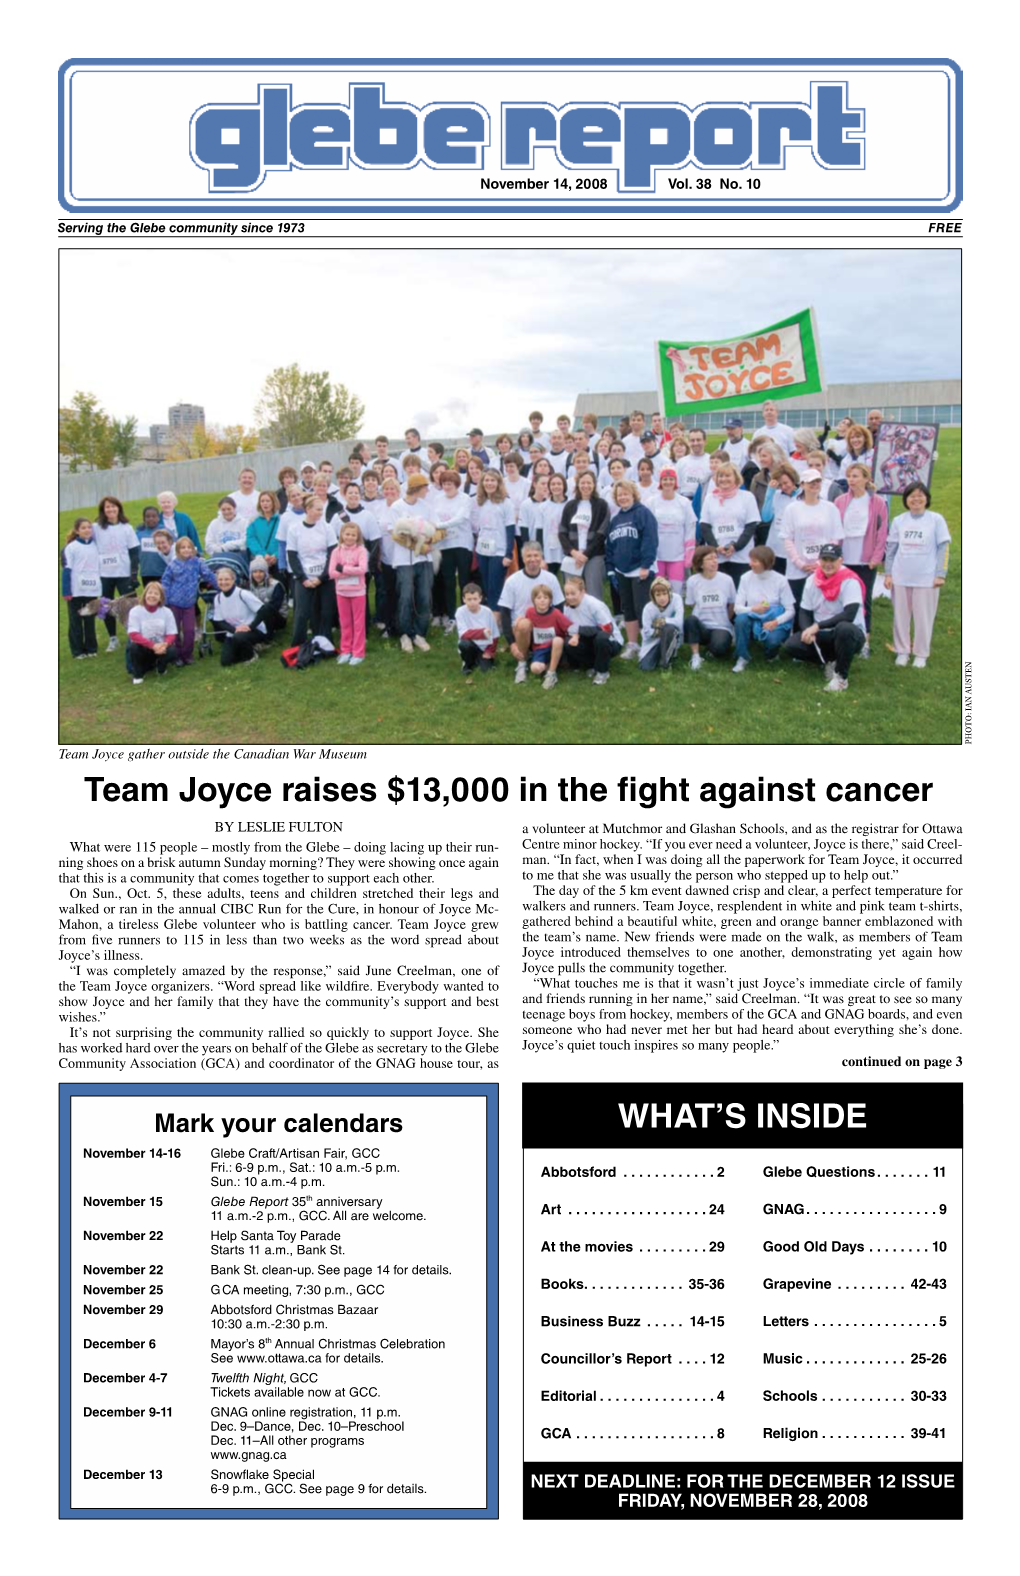 WHAT's INSIDE Team Joyce Raises $13,000 in the Fight Against Cancer